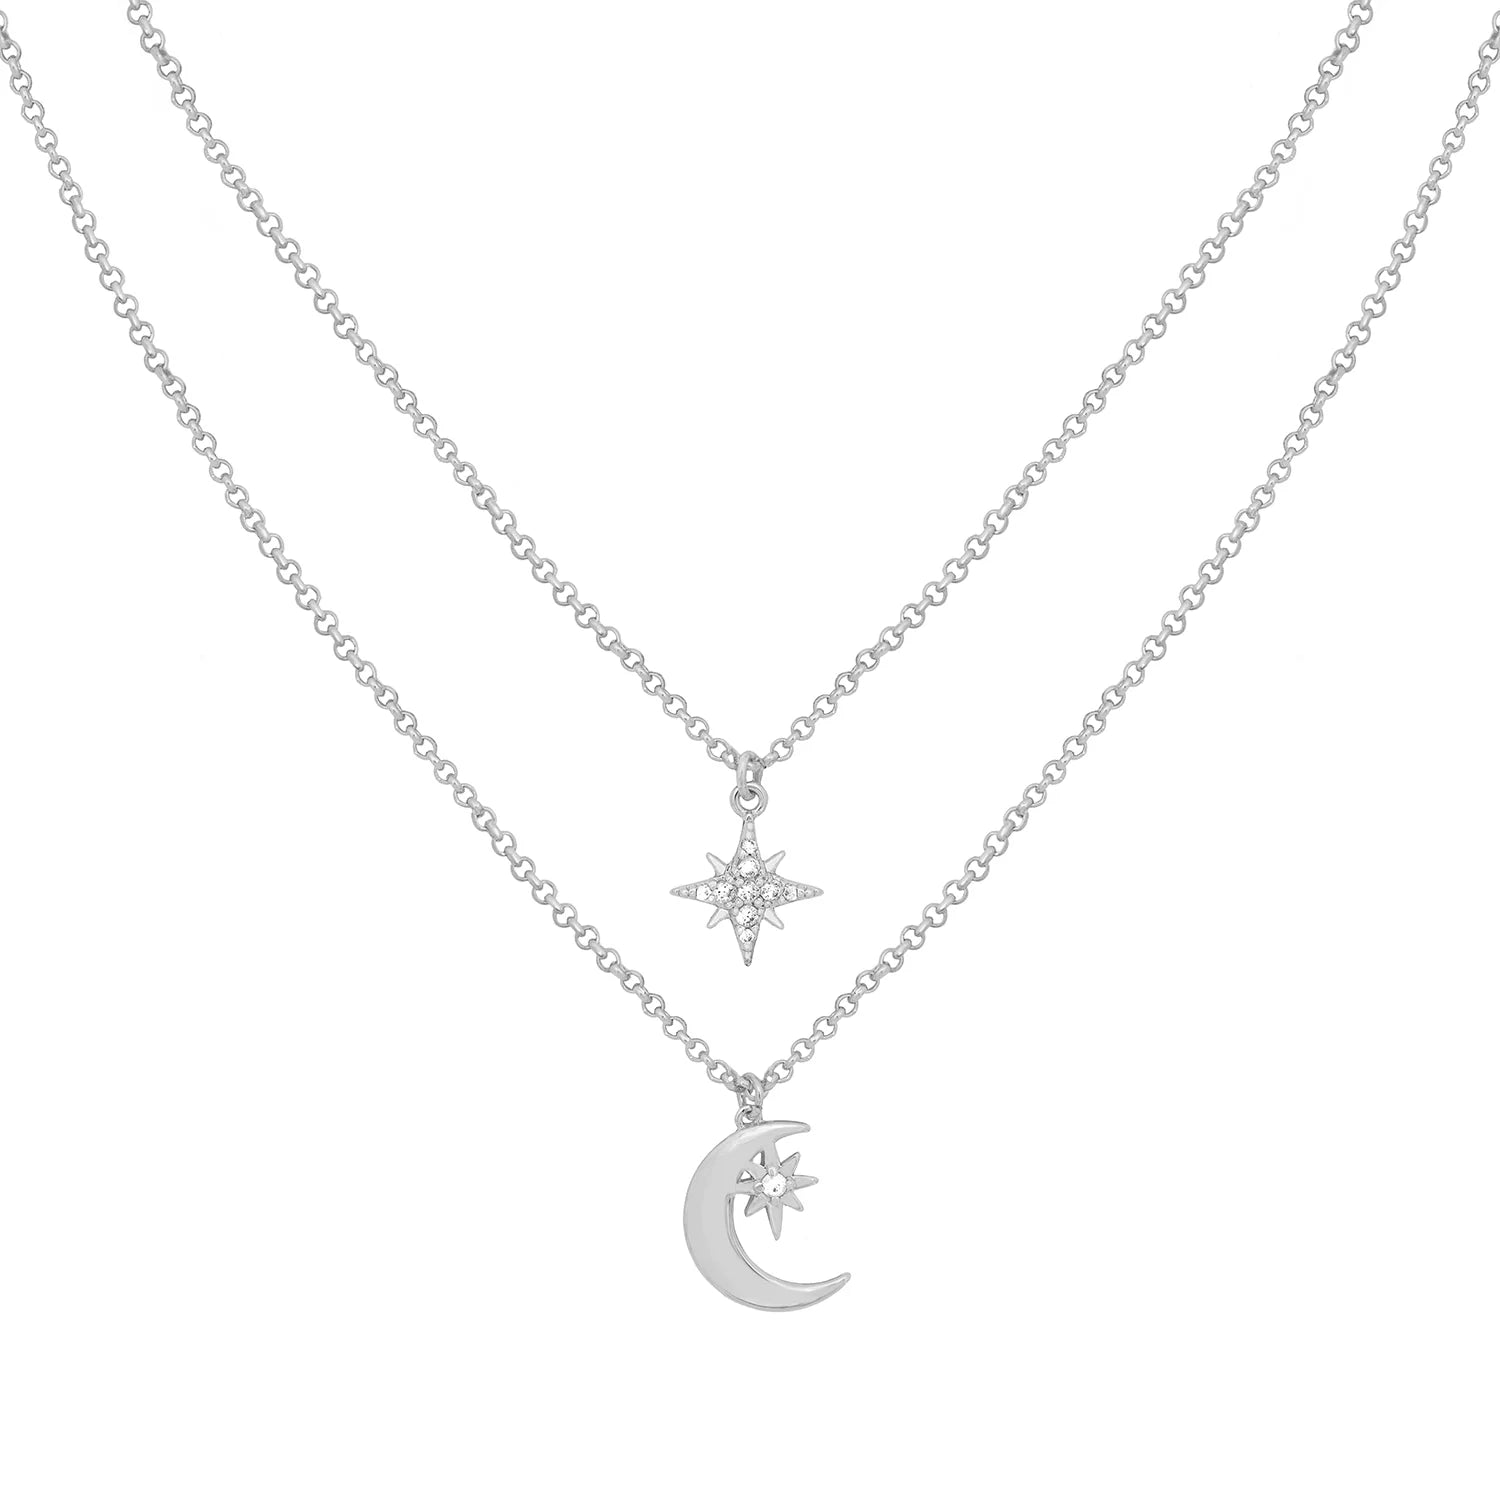 Caramel Jewellery Silver Moon & Star Double Necklace